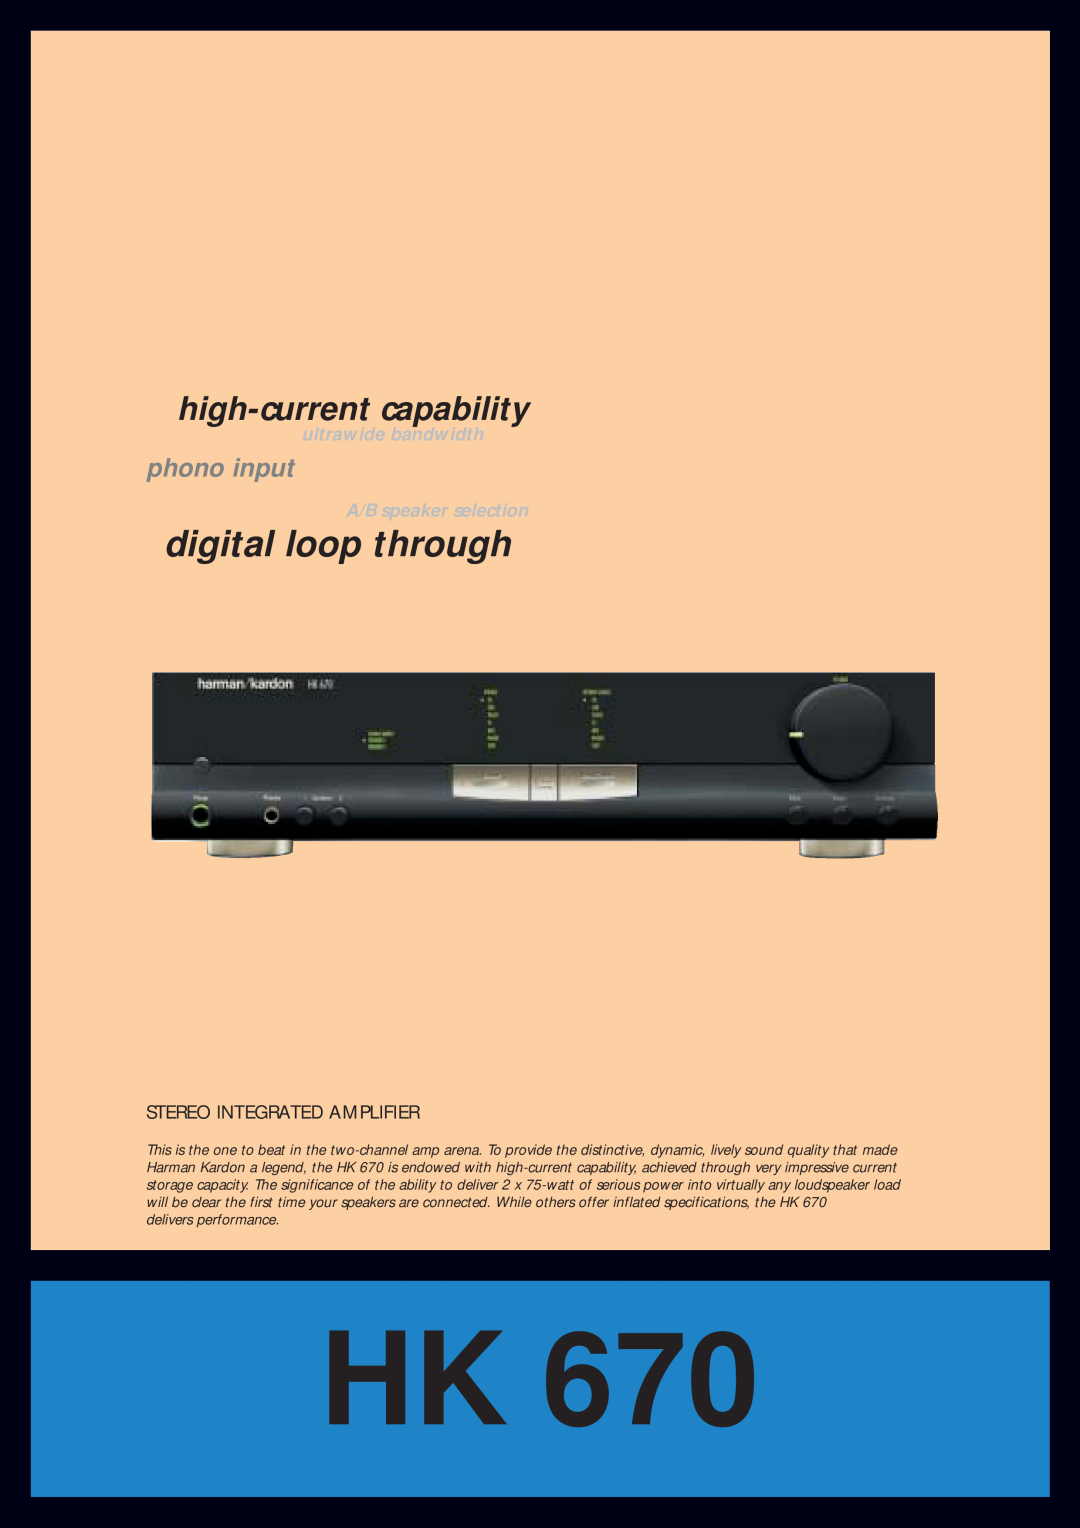 Harman-Kardon HK 670 specifications Stereo Integrated Amplifier, delivers performance, digital loop through, phono input 